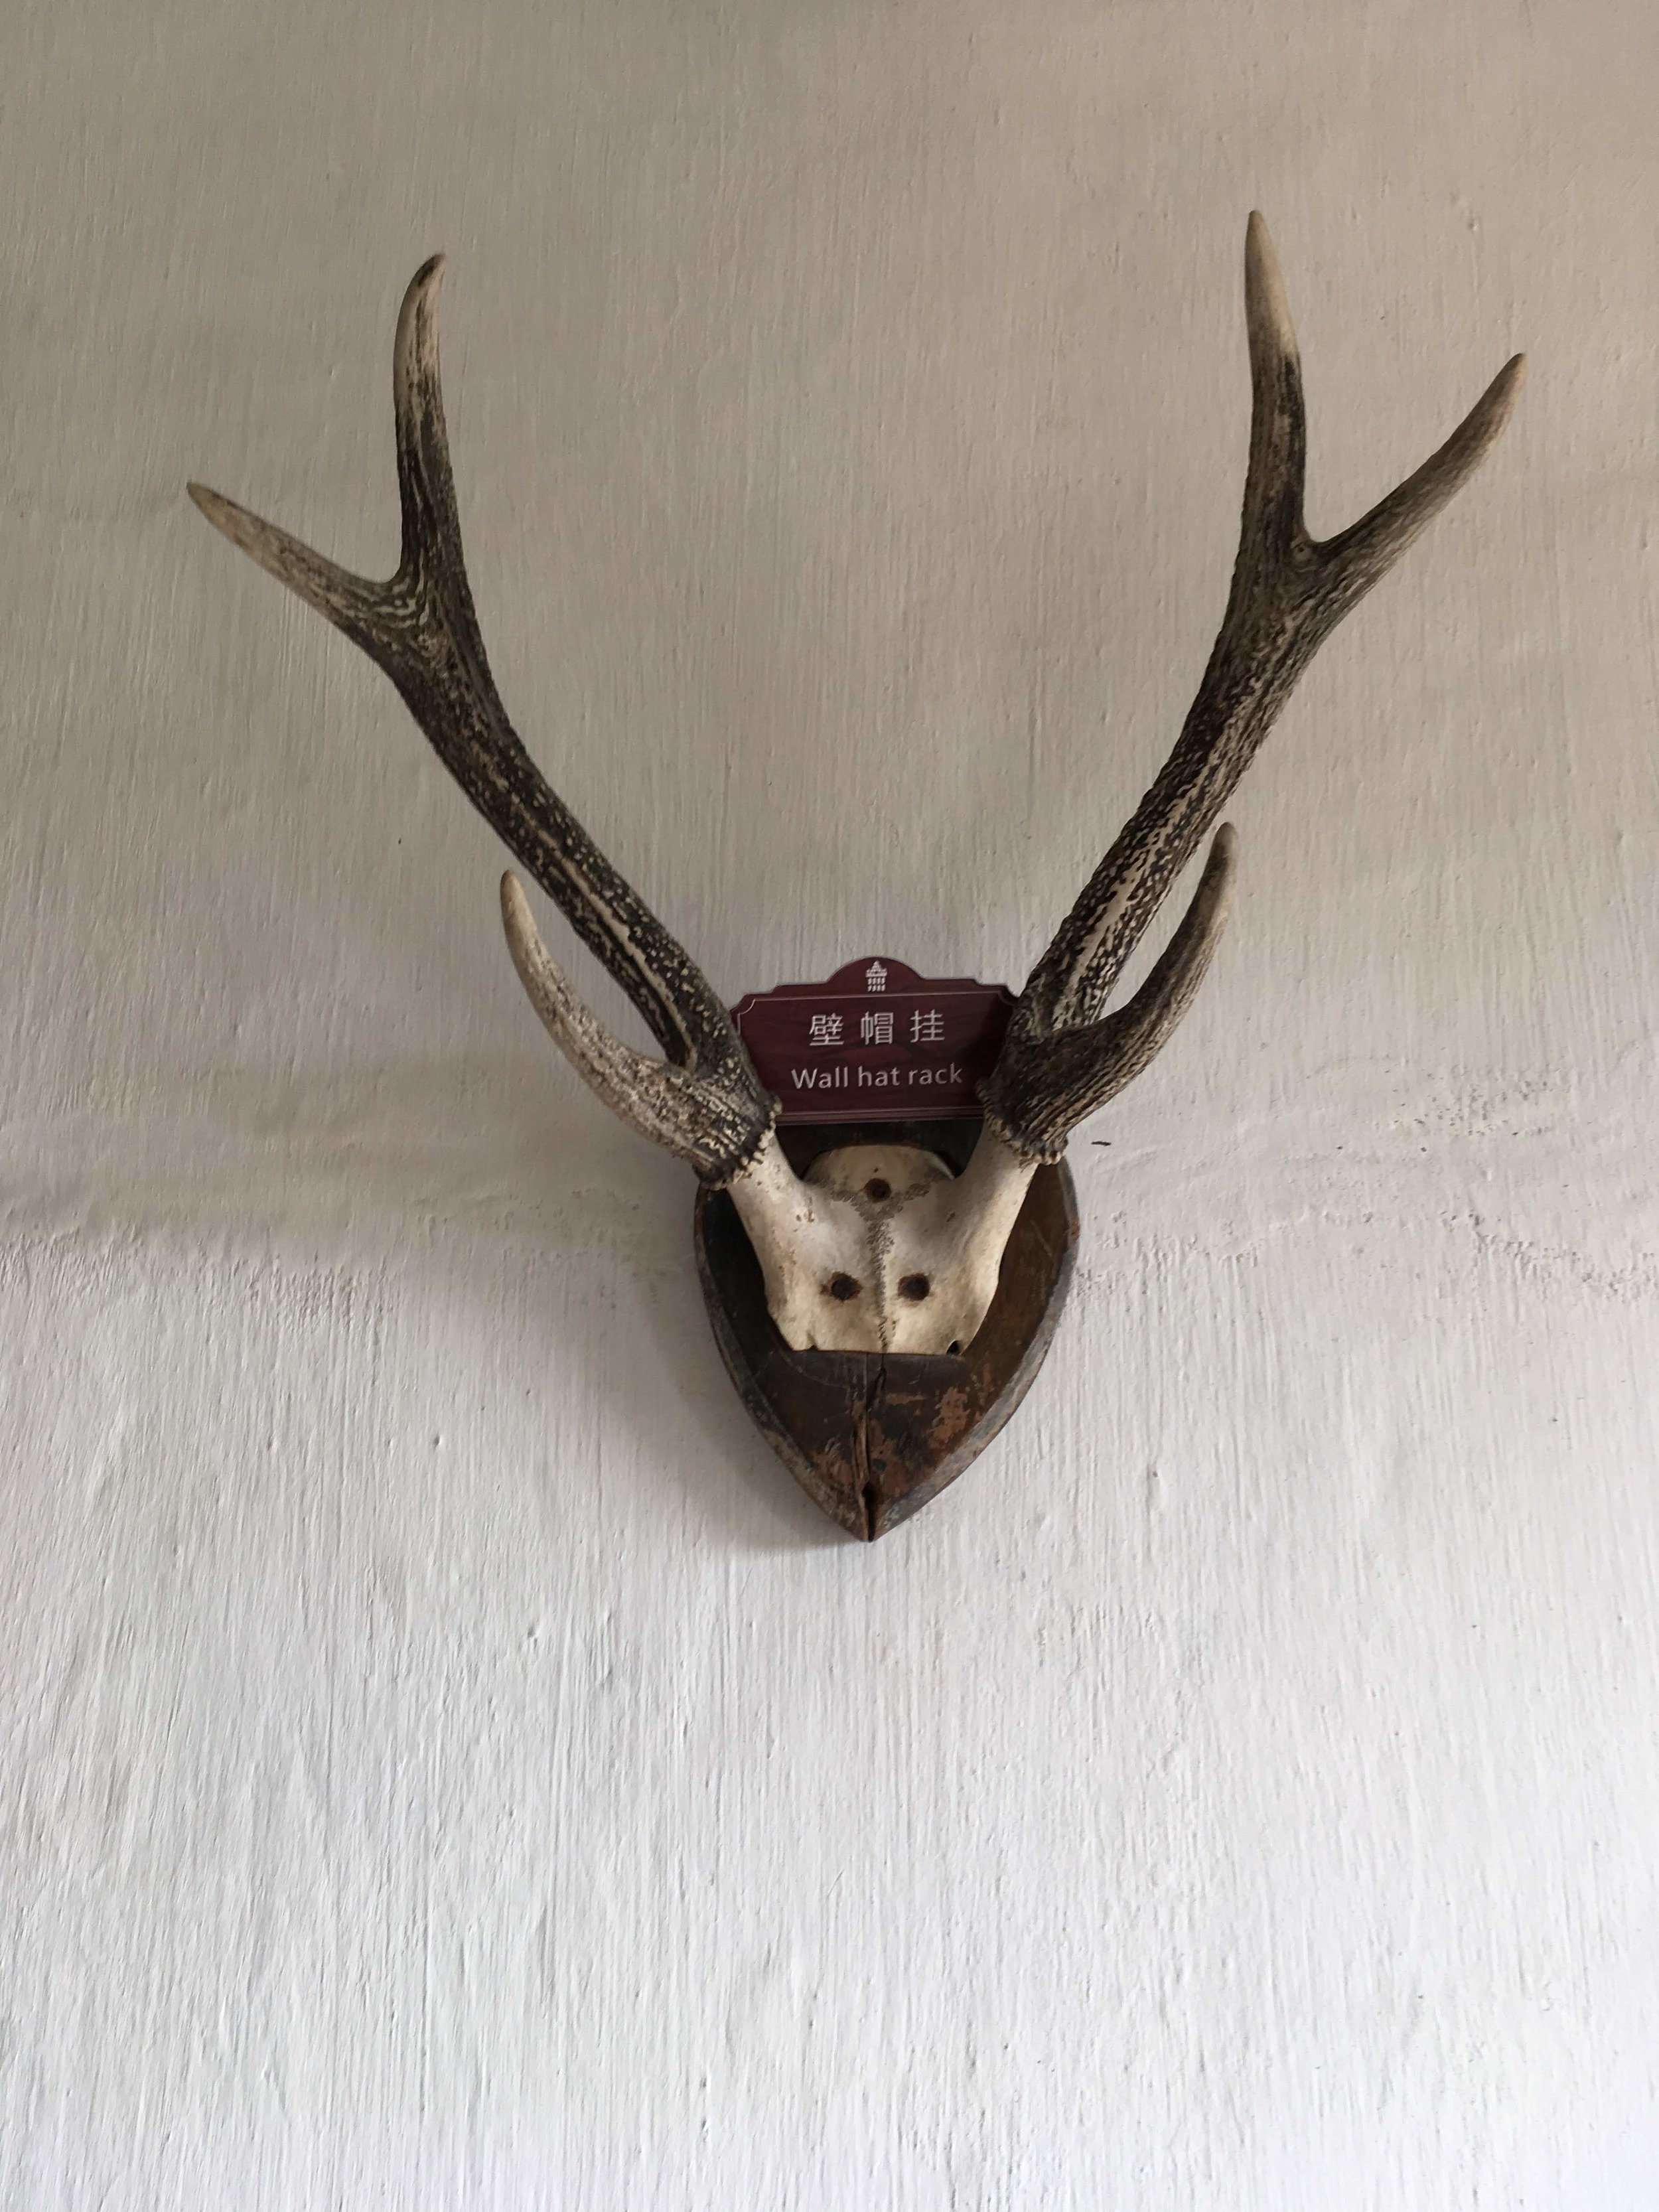  Tagged as “Wall Hat Rack.”  I think it might be elk. 